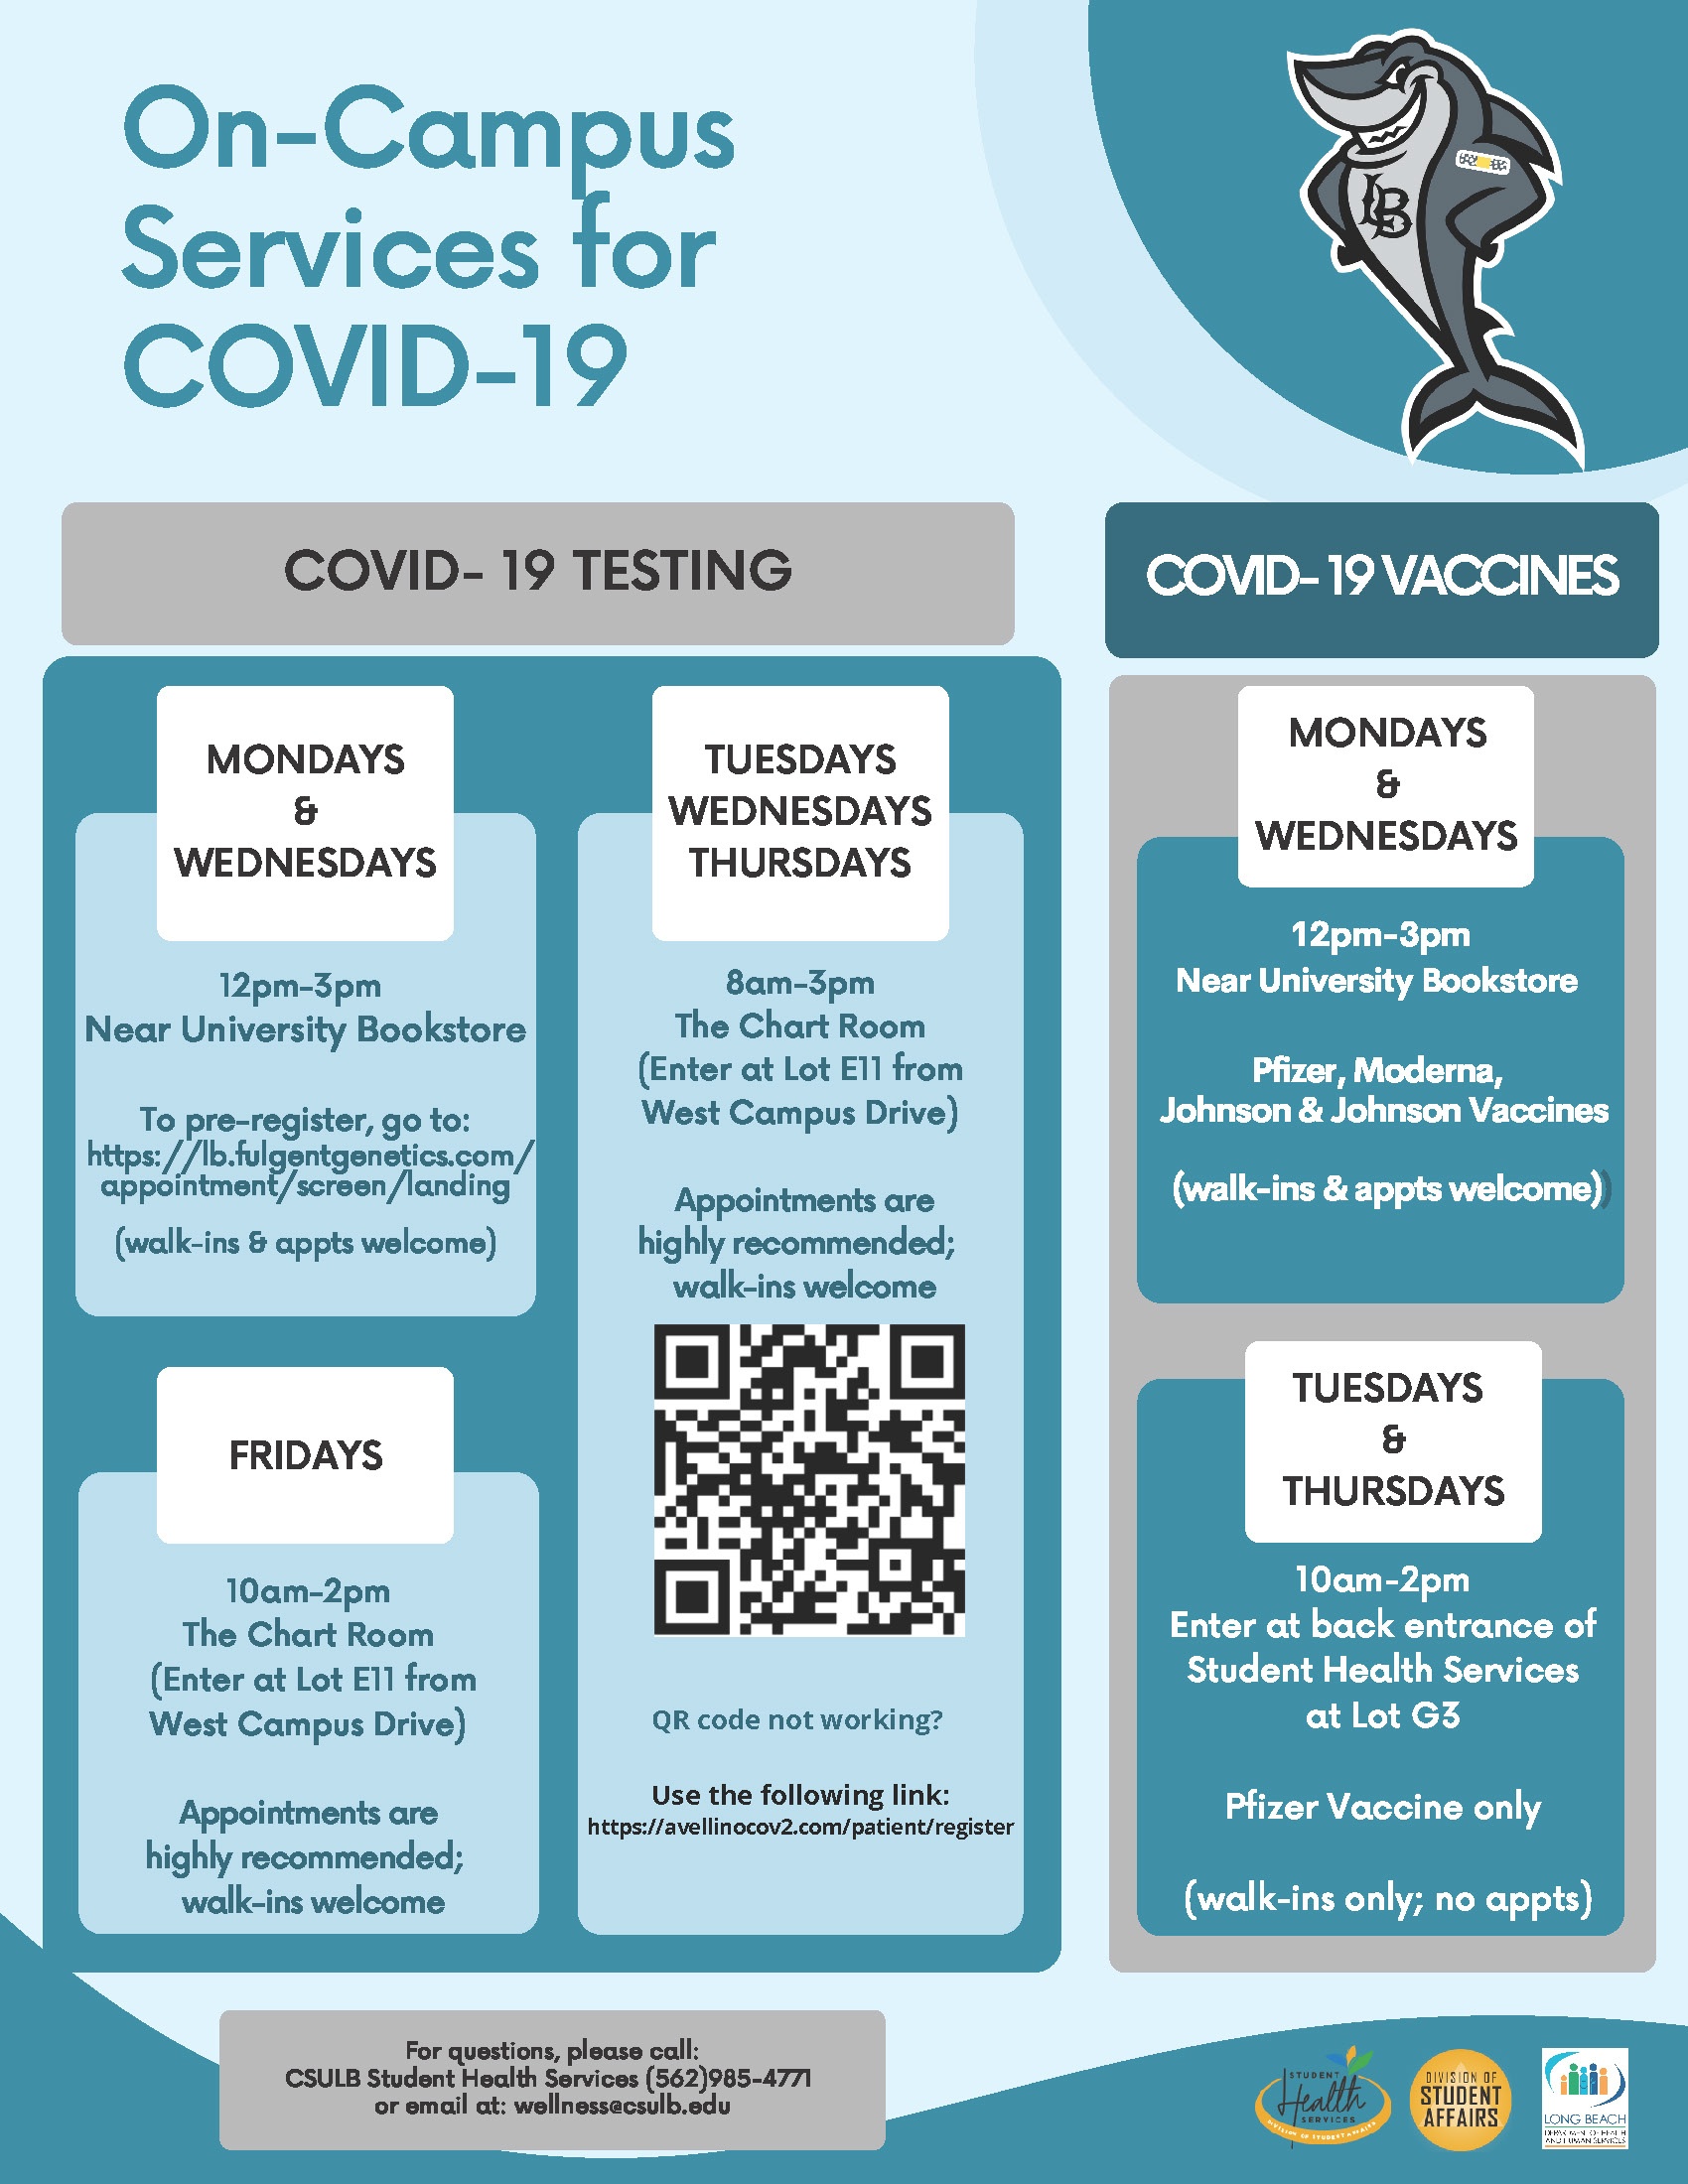 On-Campus Services for COVD 19